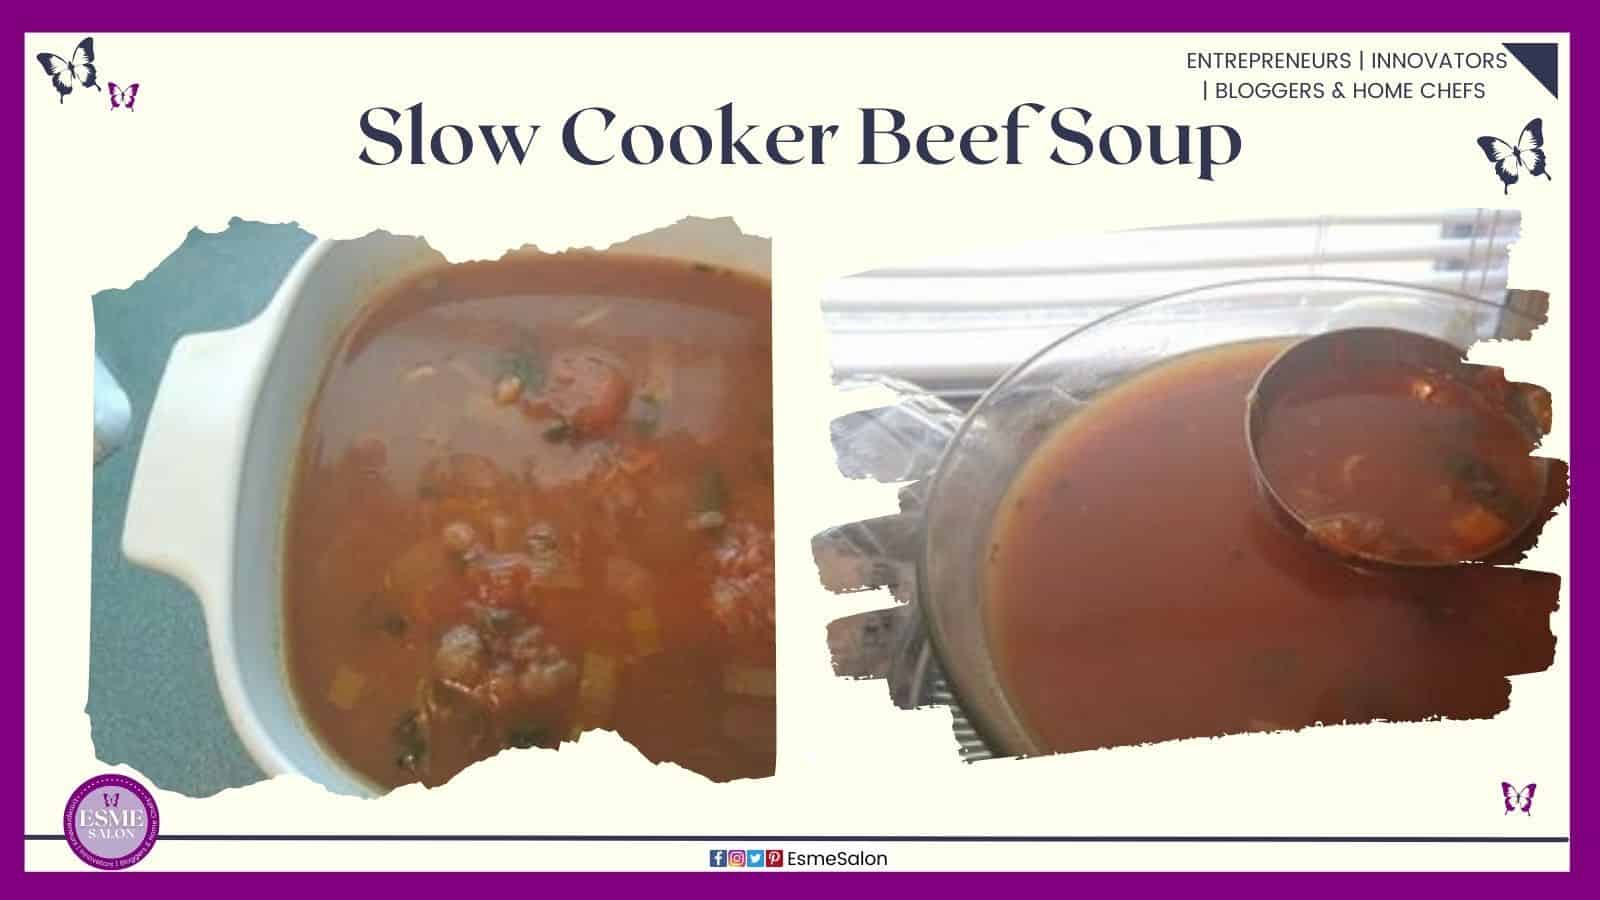 an image of a bowl filled with Home-made slow cooker beef soup